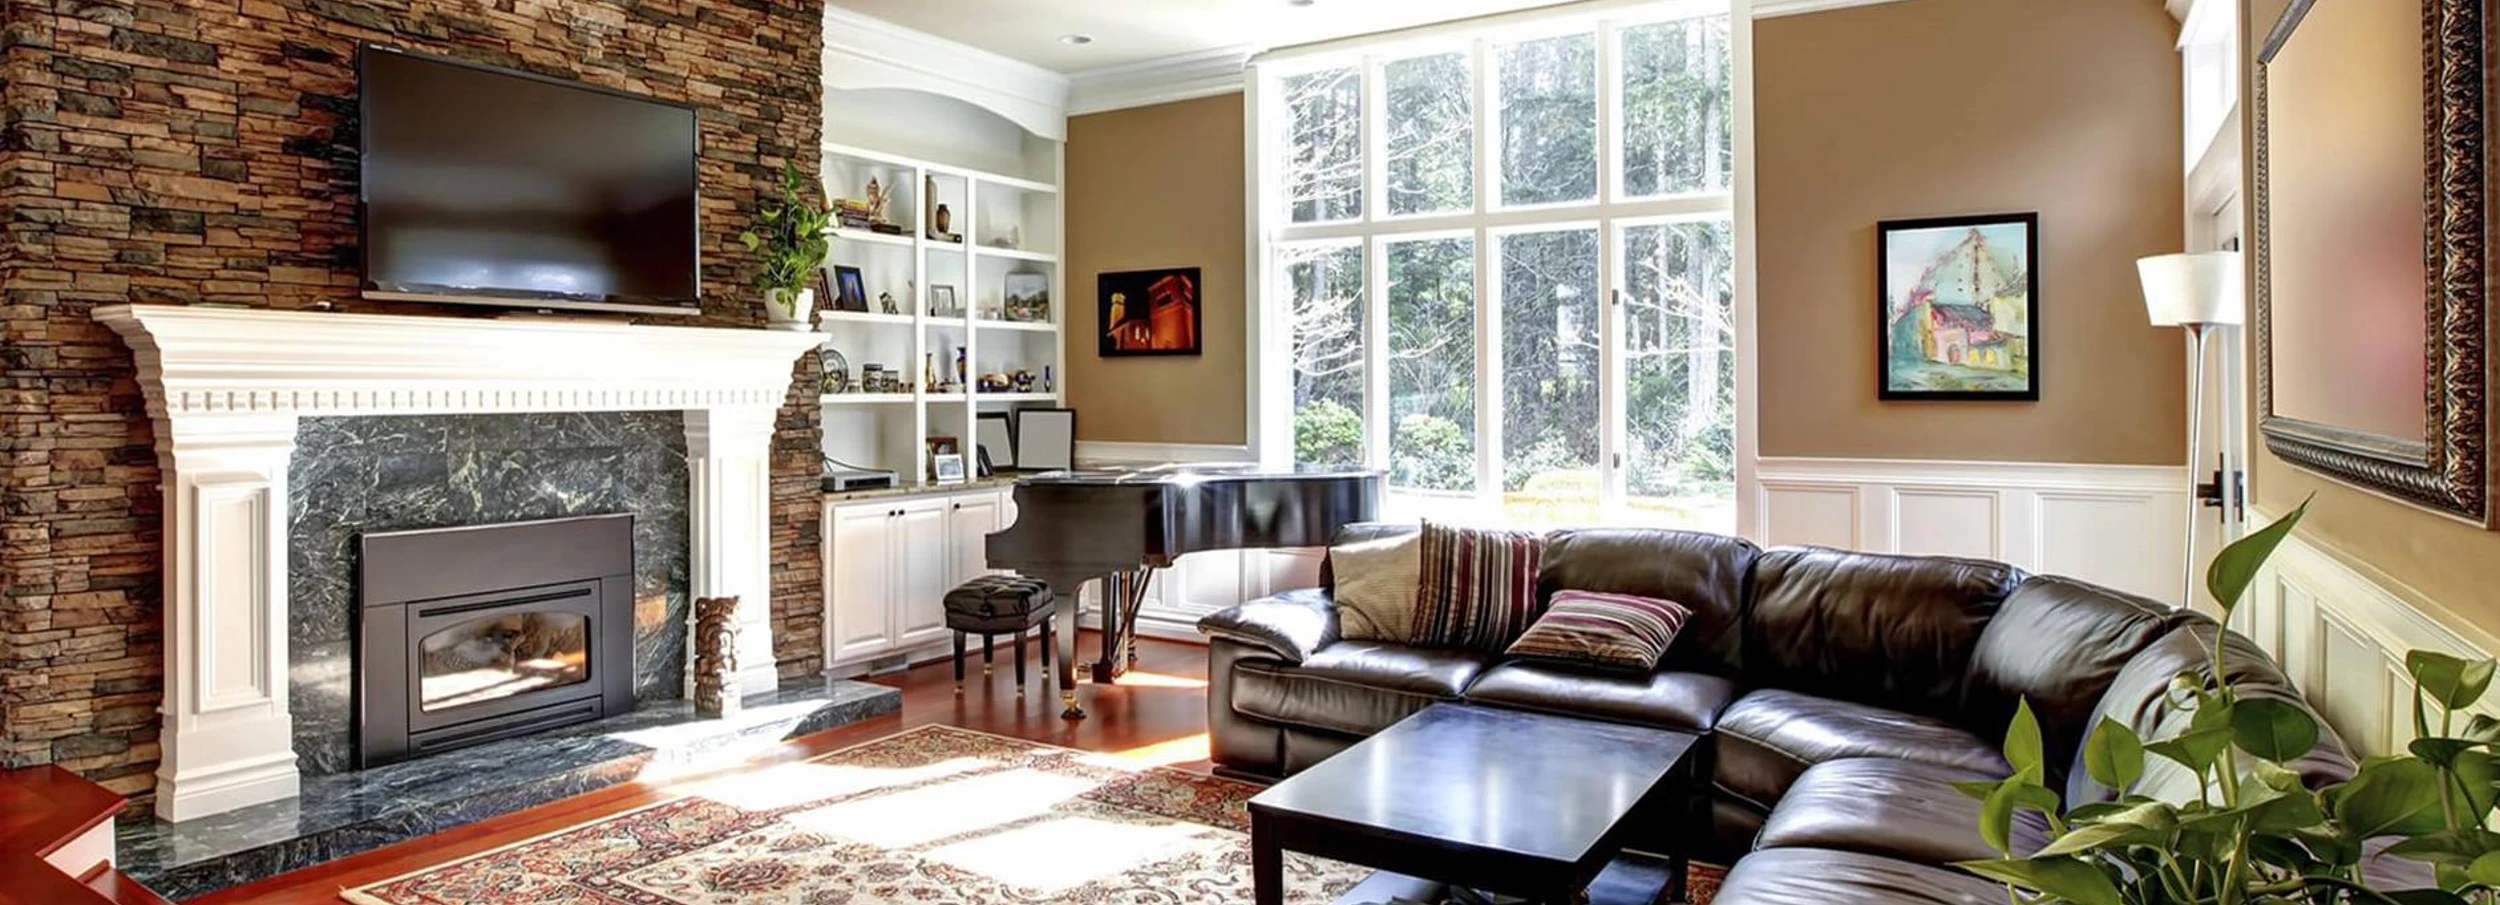 Brown themed living room with leather couch and brick fireplace.